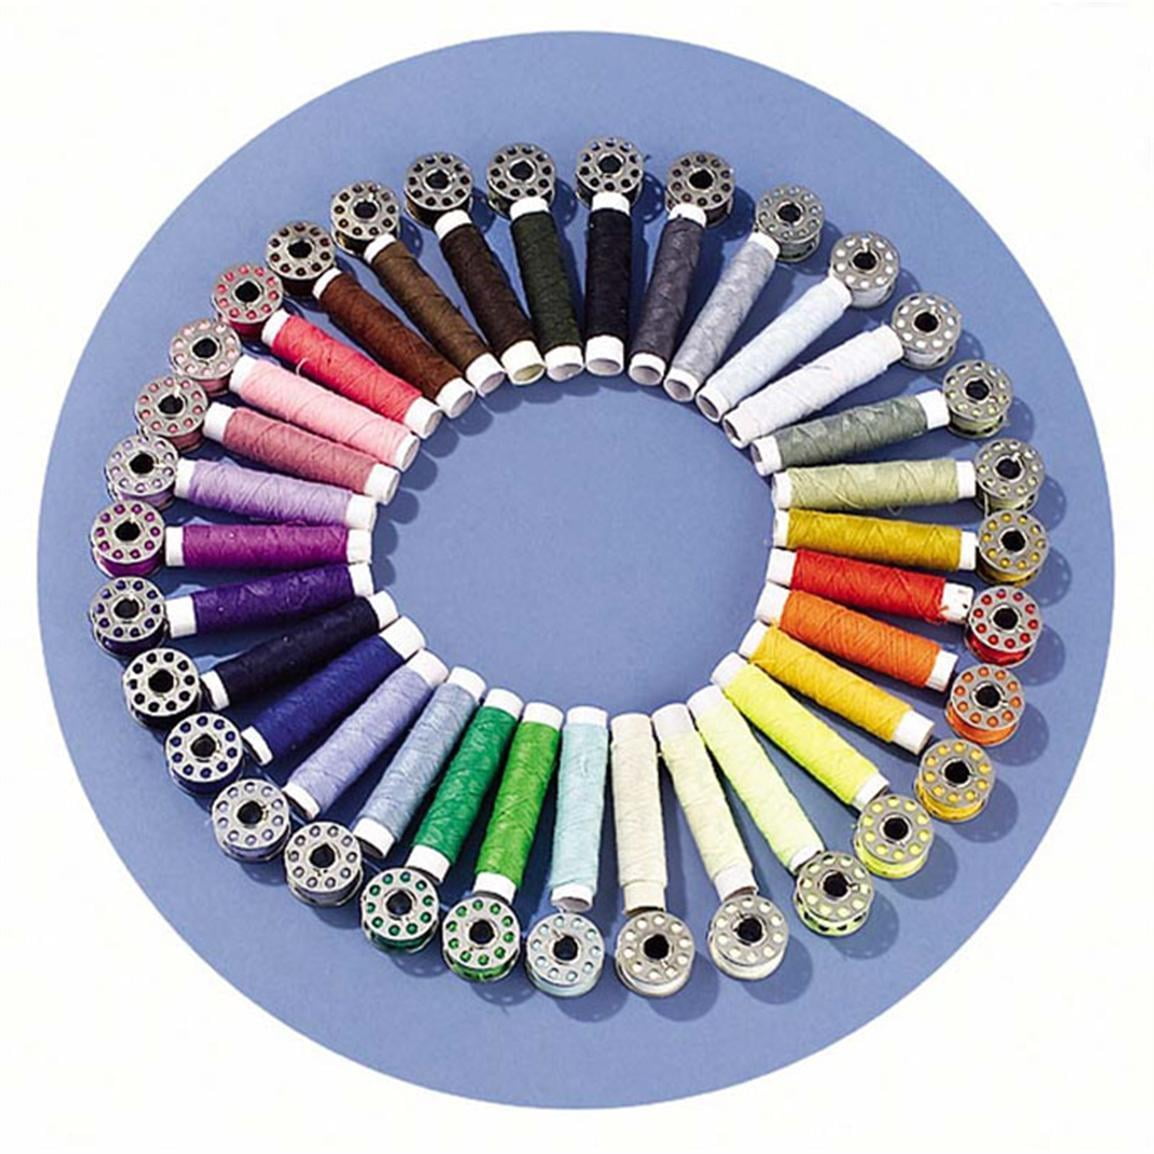 34pcs Sewing Kit Including Bobbins, Scissors, Needles, Tape Measure,  Thimbles, Sewing Supplies Accessories Carrying Case 